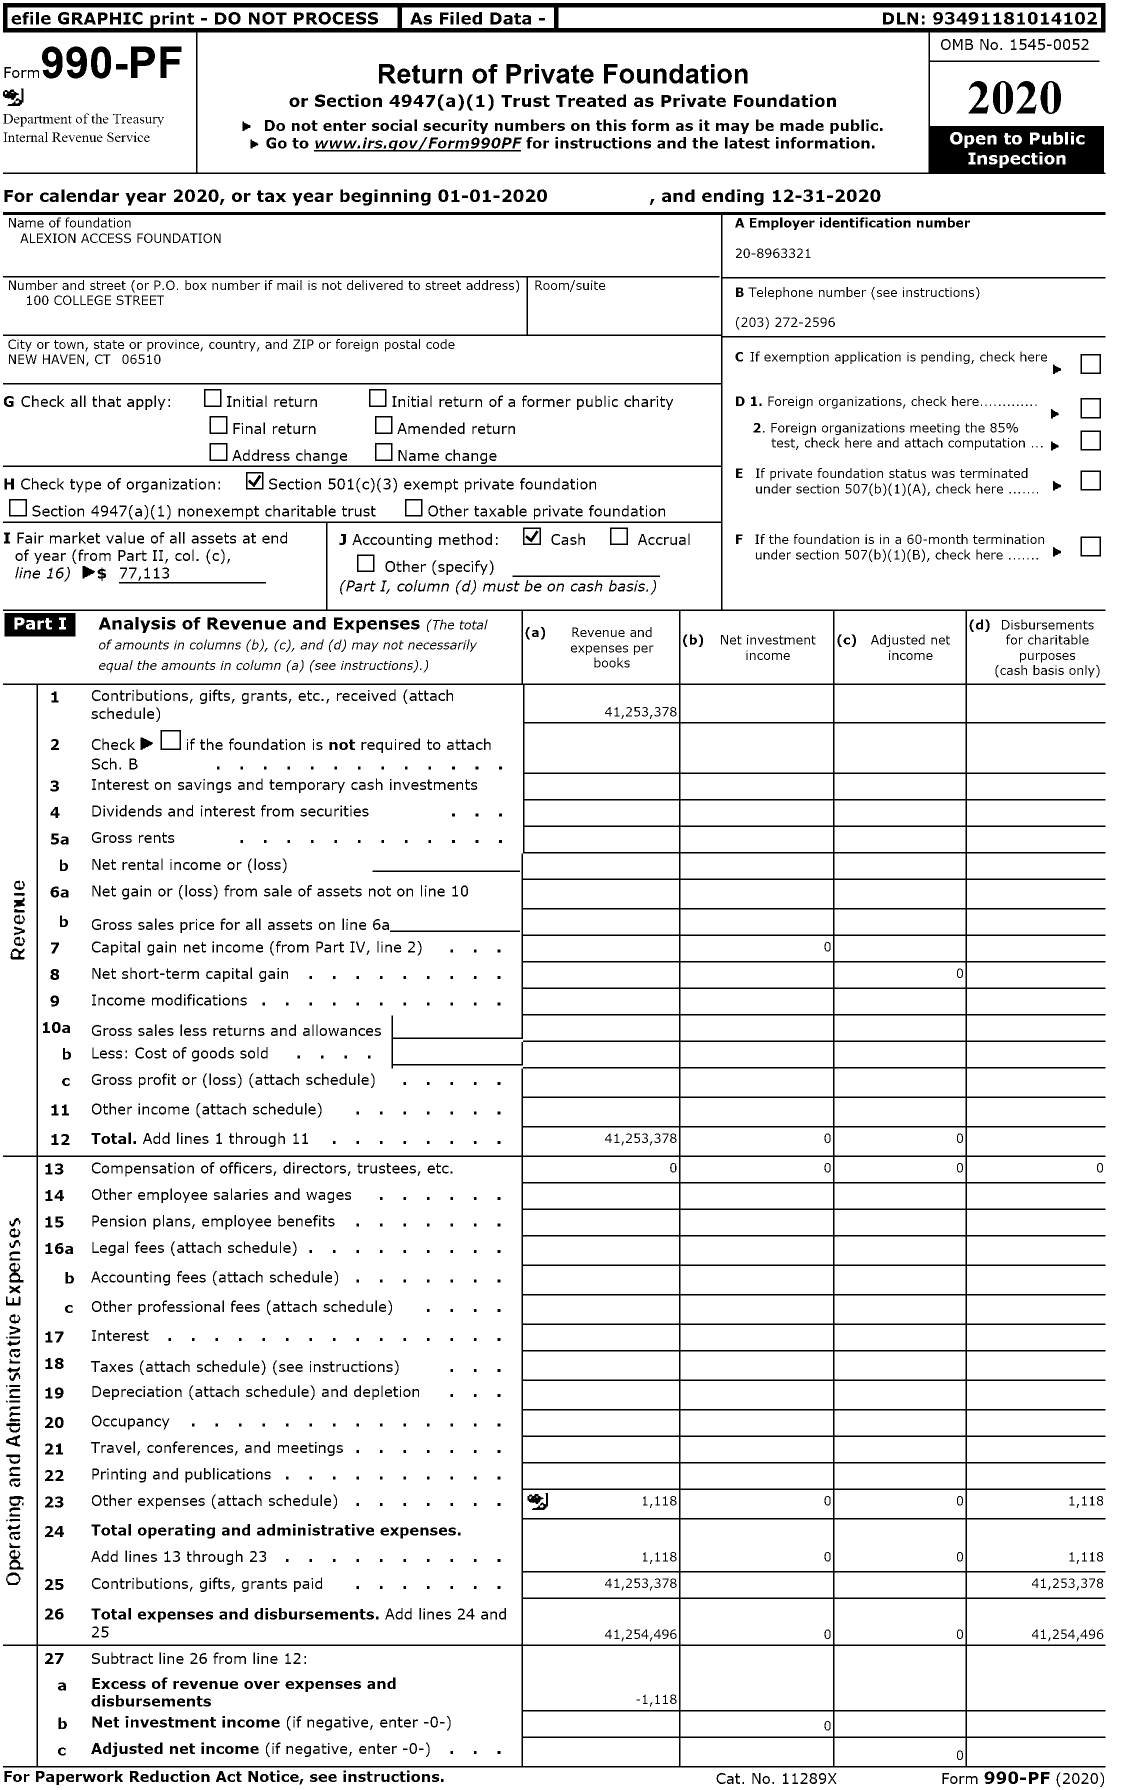 Image of first page of 2020 Form 990PF for Alexion Access Foundation